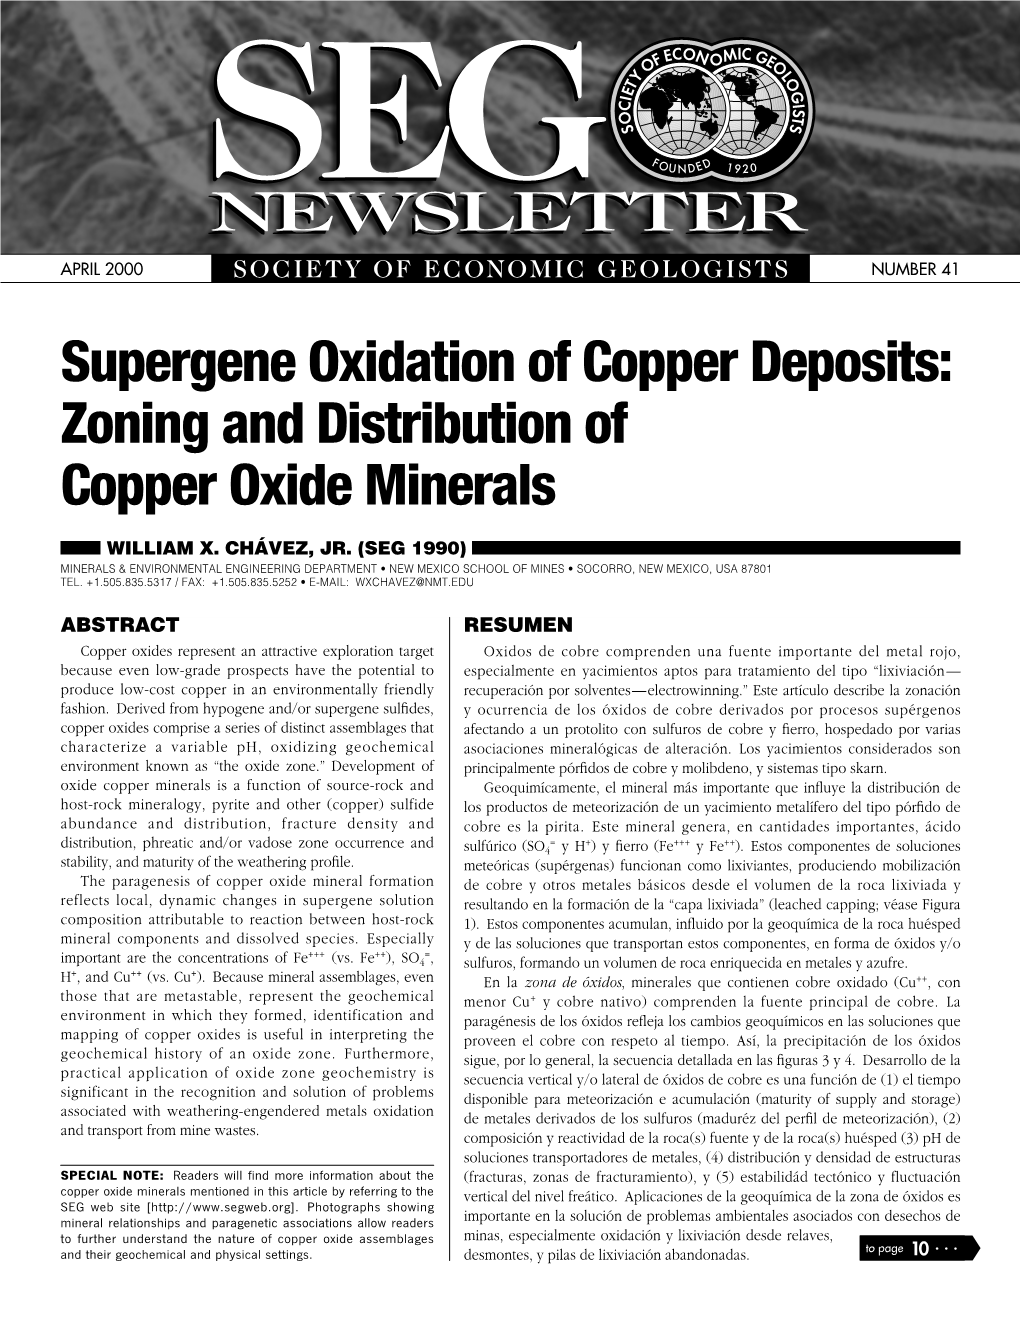 Supergene Oxidation of Copper Deposits: Zoning and Distribution of Copper Oxide Minerals